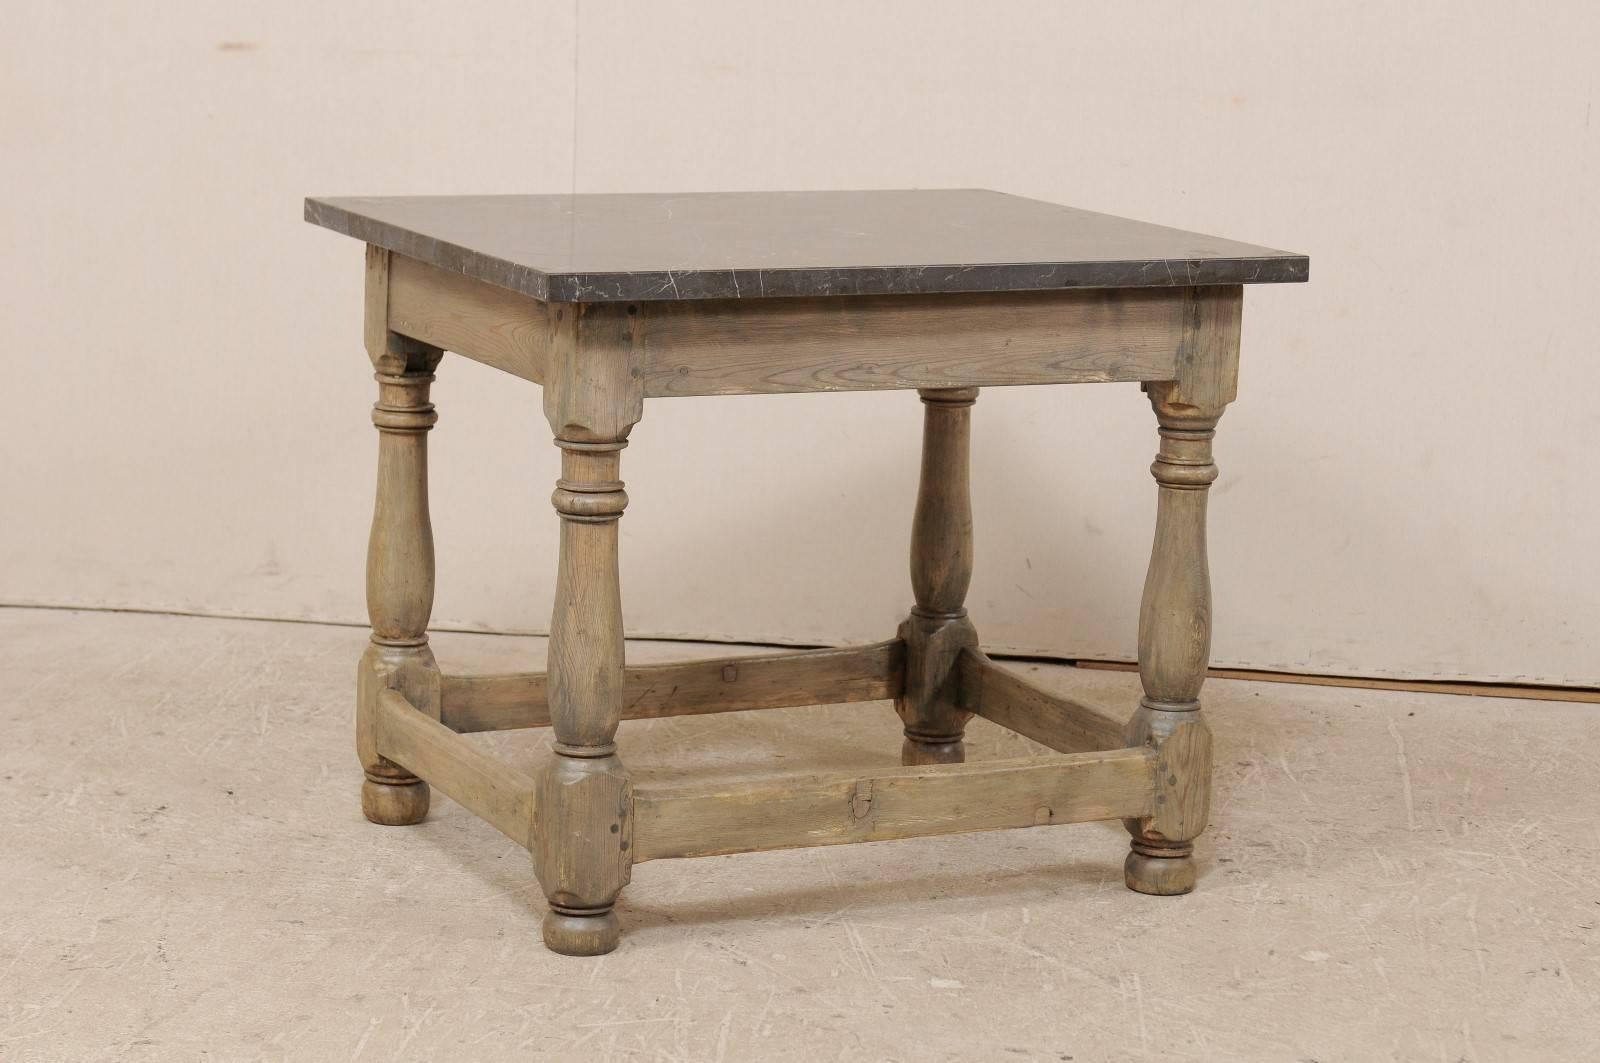 A Swedish 18th century table with honed marble top. This Swedish occasional table features a honed marble top resting upon a wood frame with four turned legs. The skirt is clean and simple and there are bottom stretchers between each leg along all